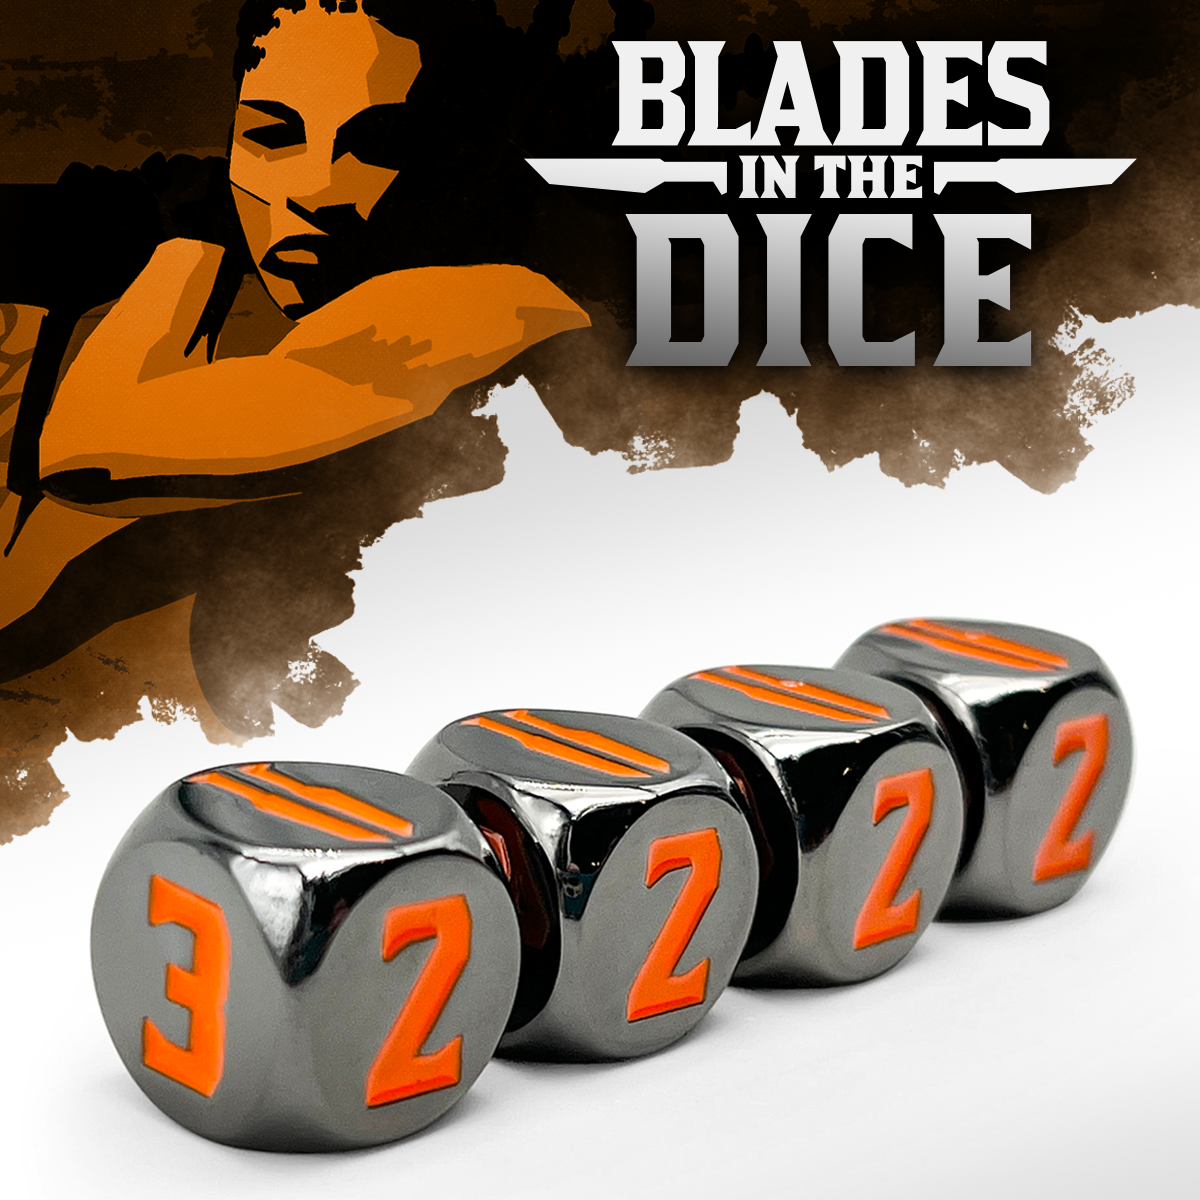 Blades In The Dark png images